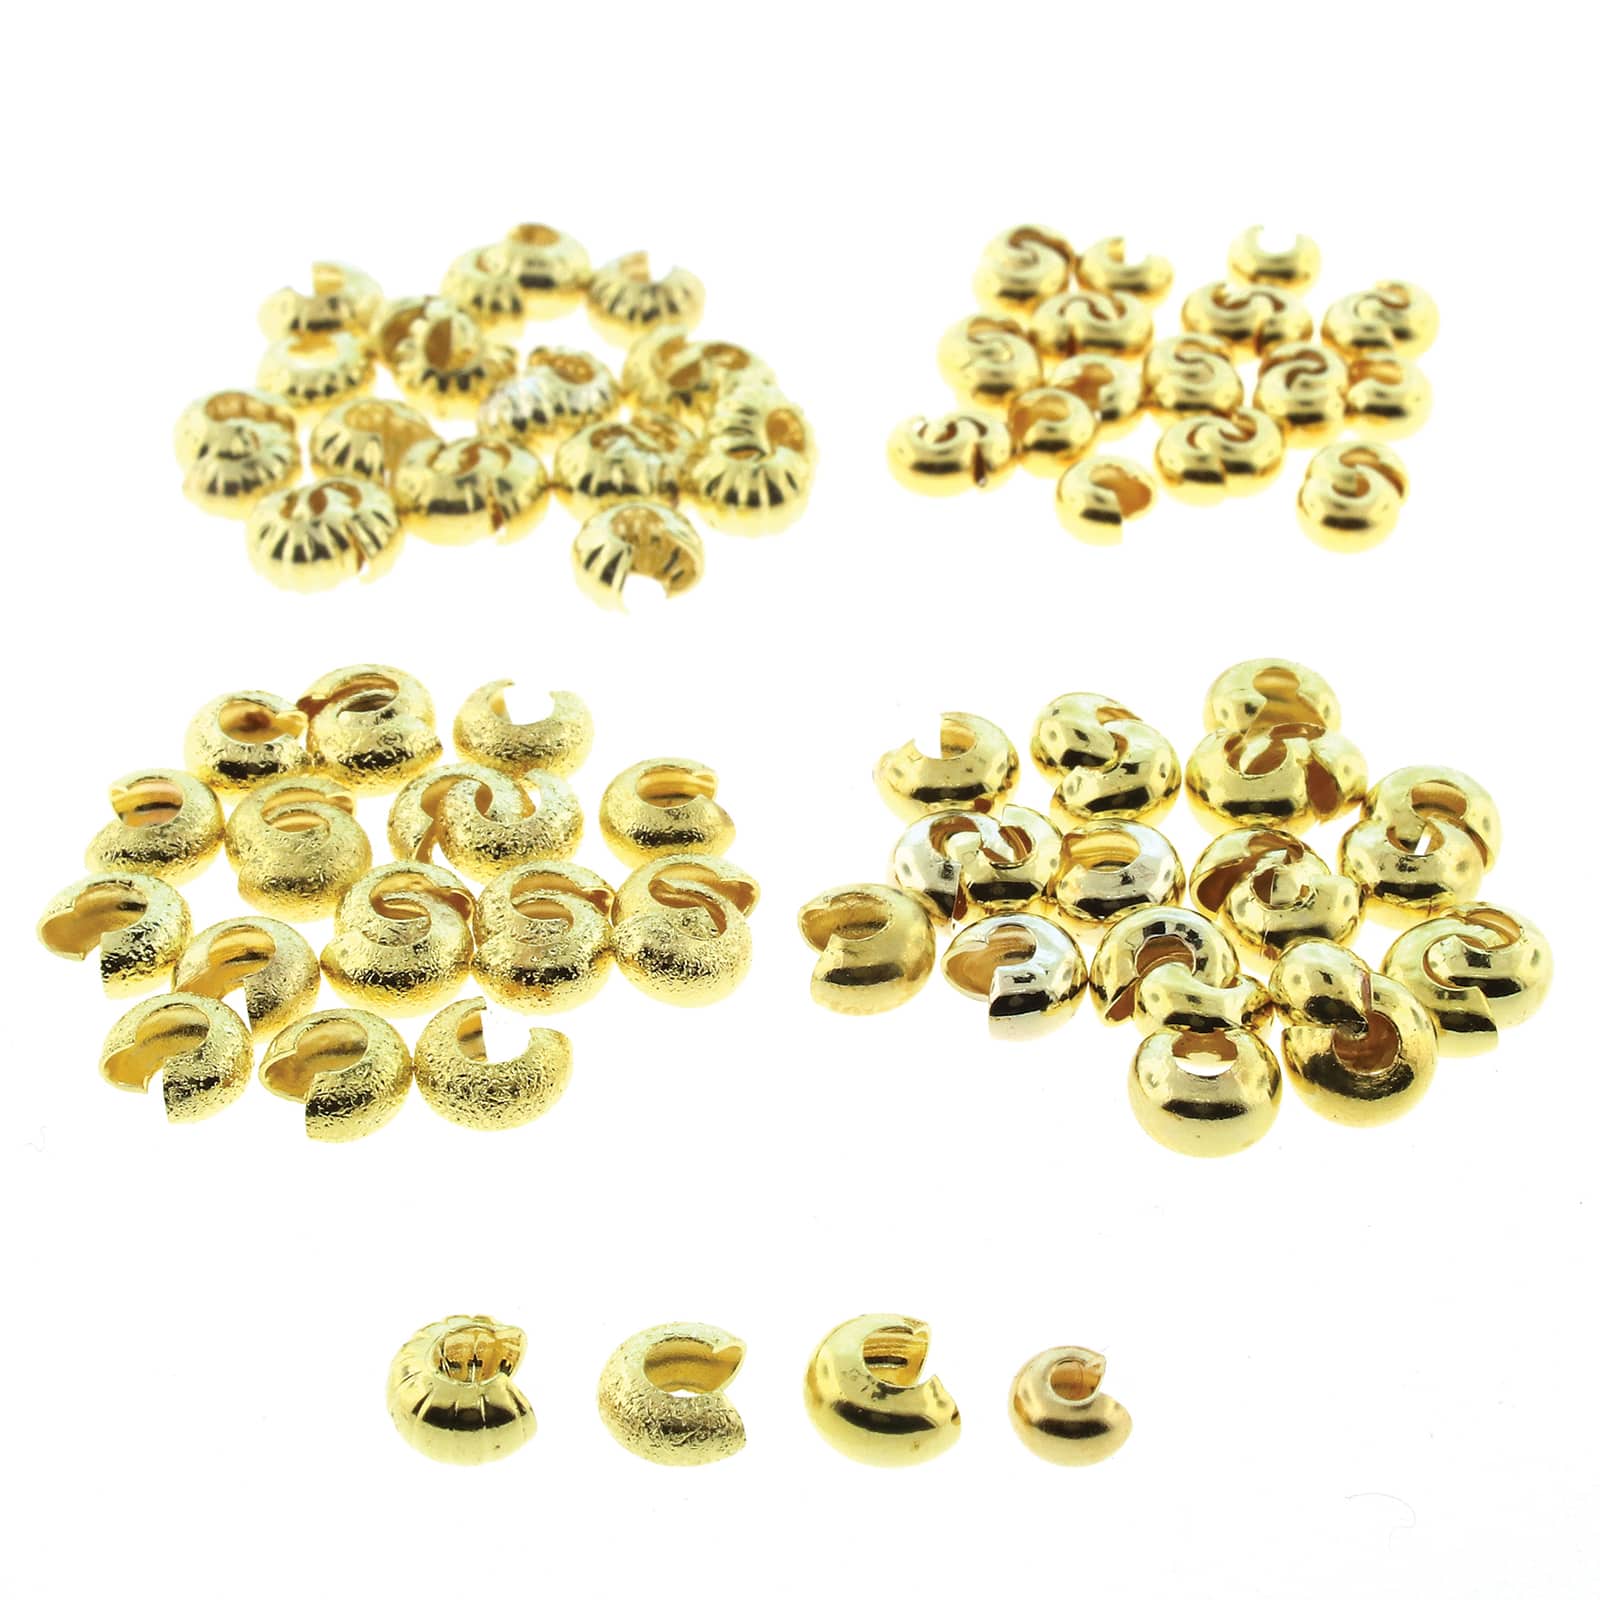 The Beadsmith® Gold Plated Crimp Bead Cover, 80ct. | Michaels